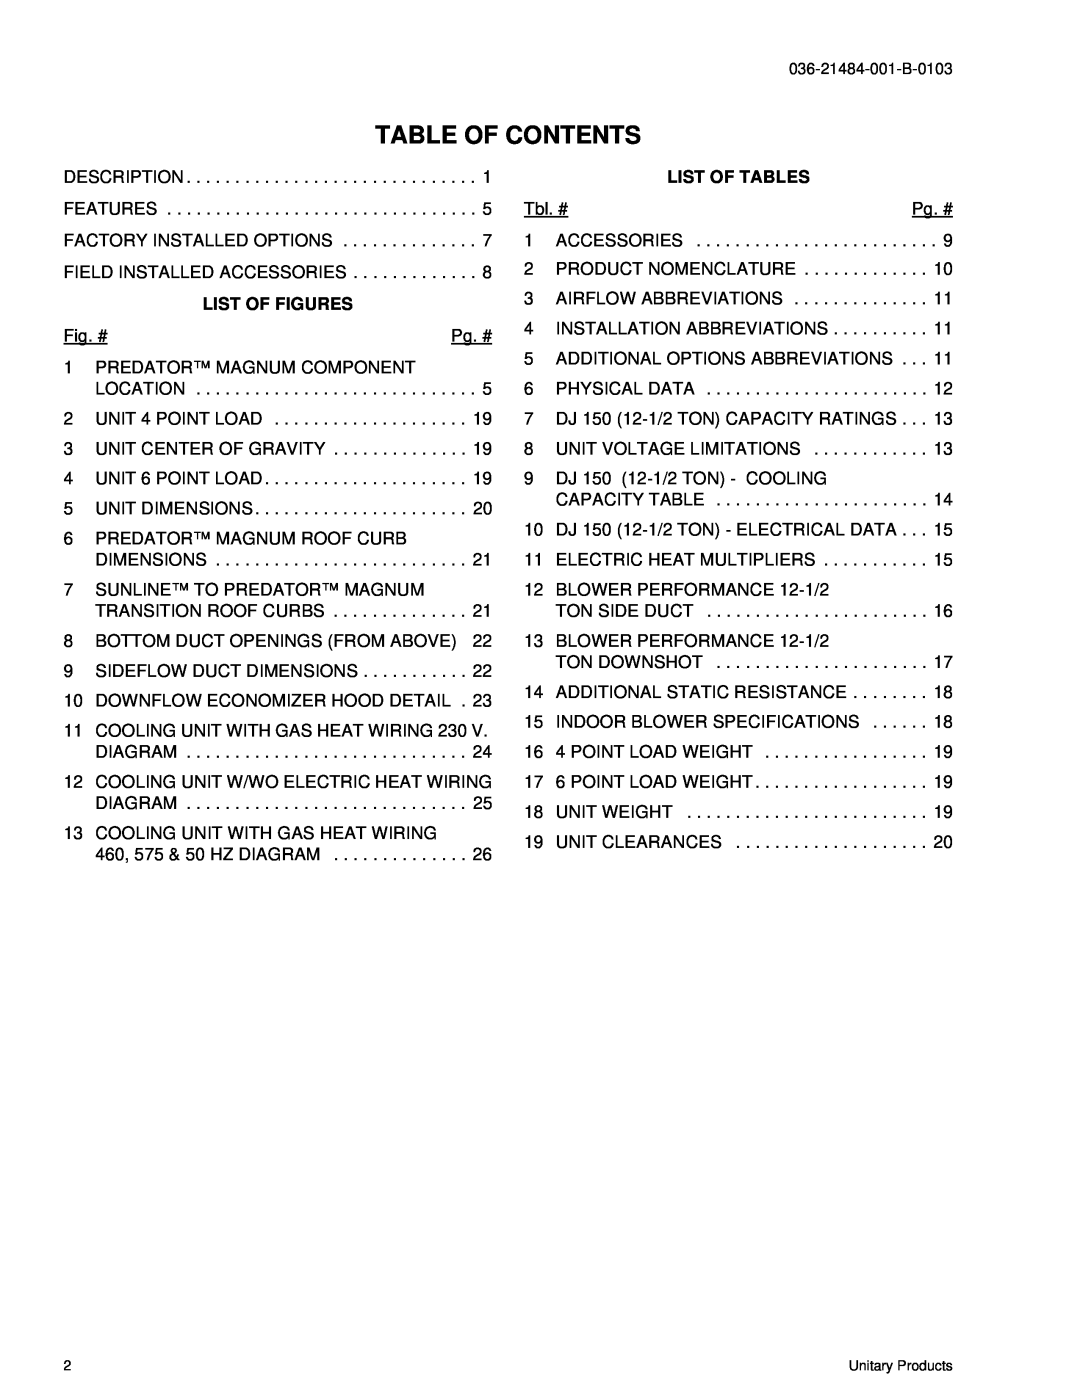 York DJ 150 manual List Of Figures, List Of Tables, Table Of Contents 